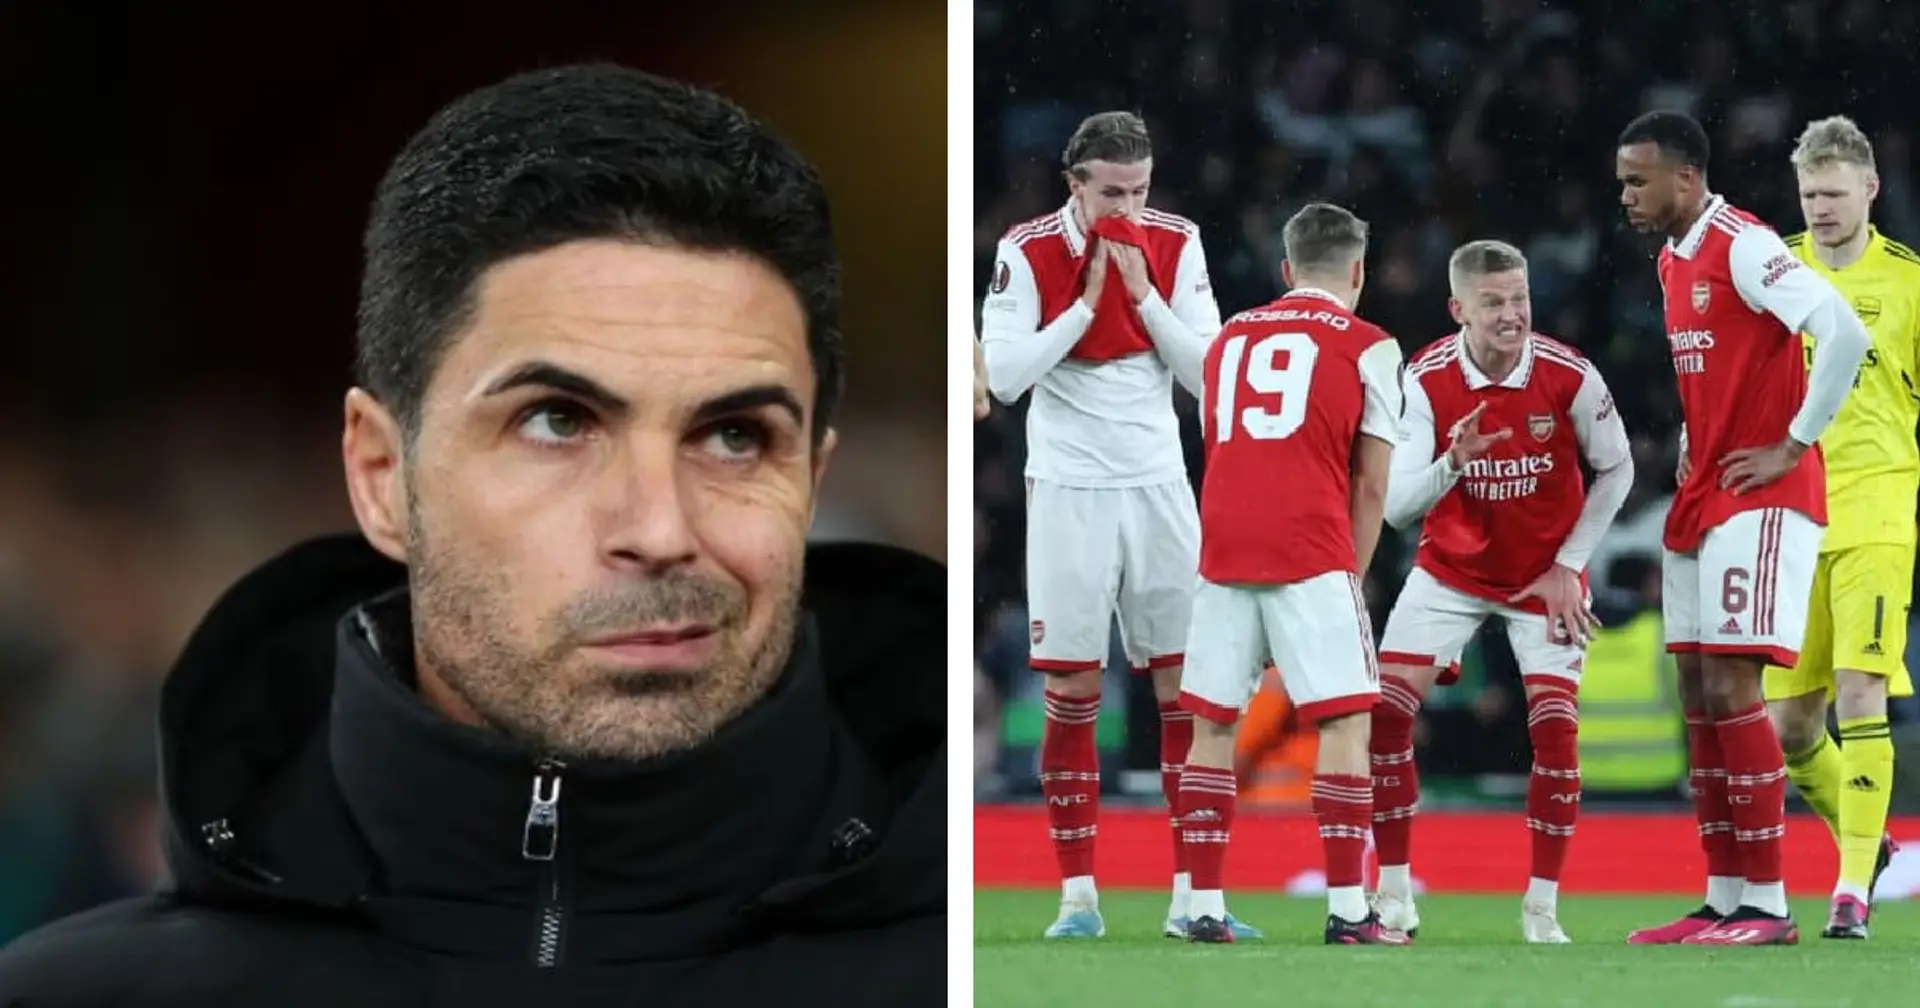 'Too late': Mikel Arteta reveals message to Arsenal players after Europa League exit